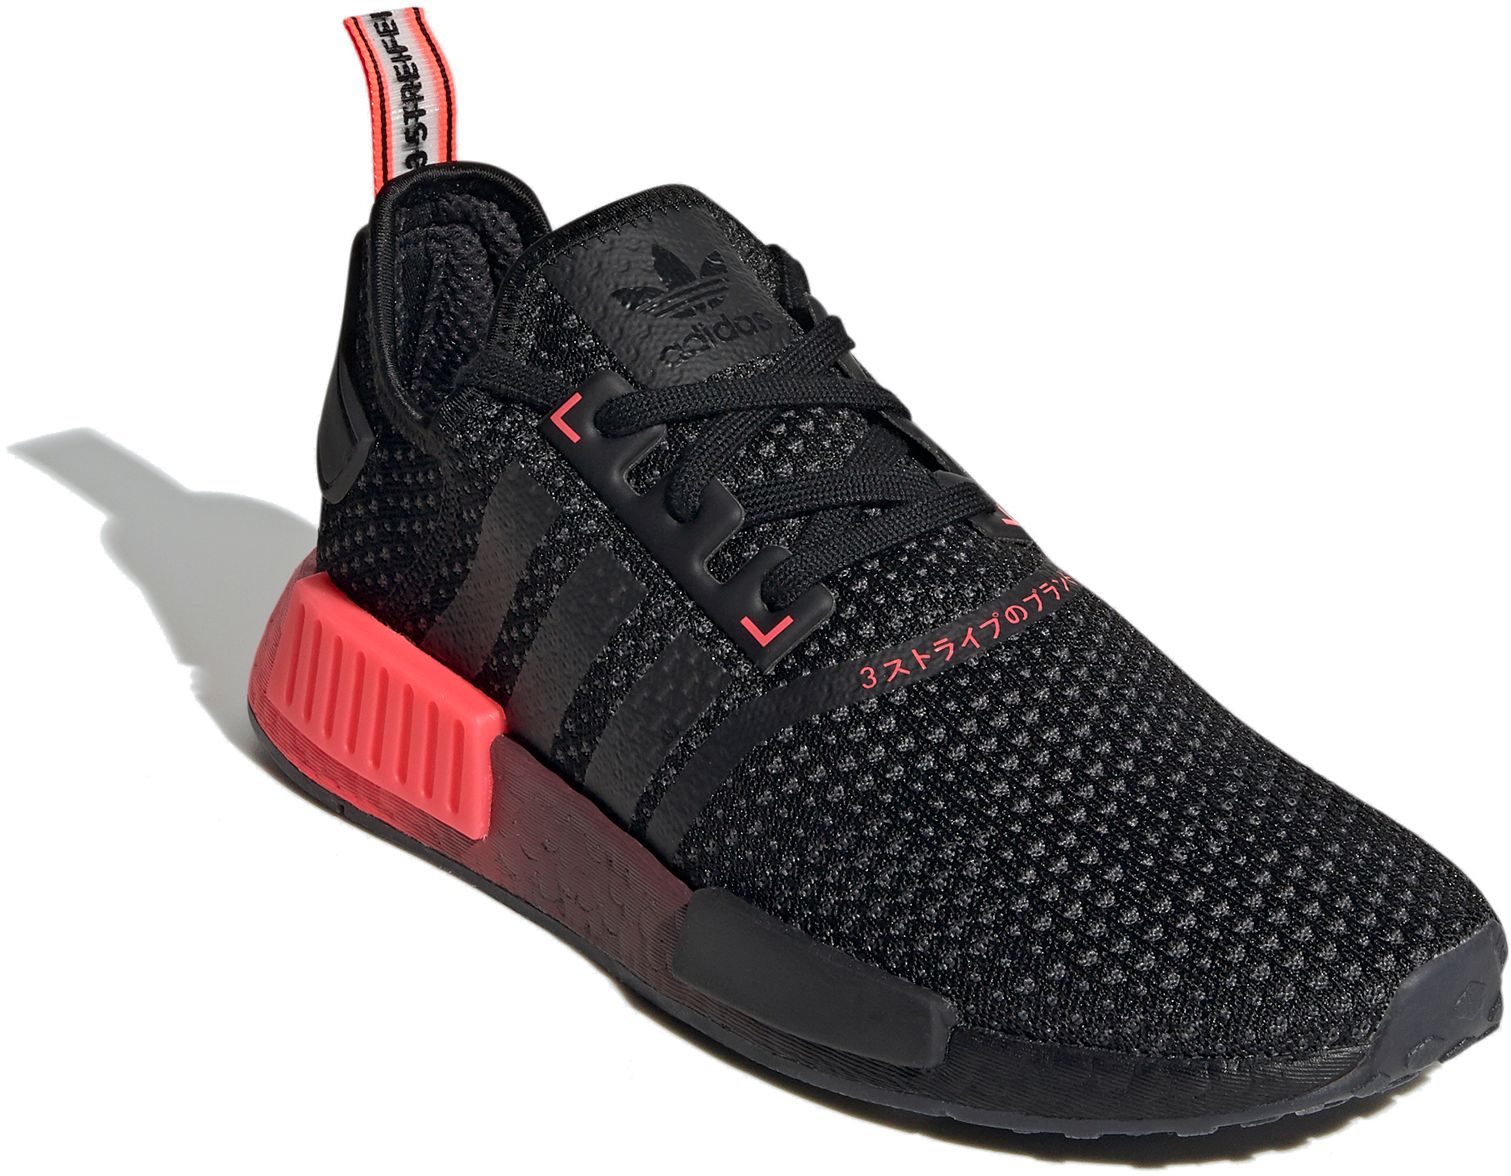 adidas men's nmd_r1 shoes